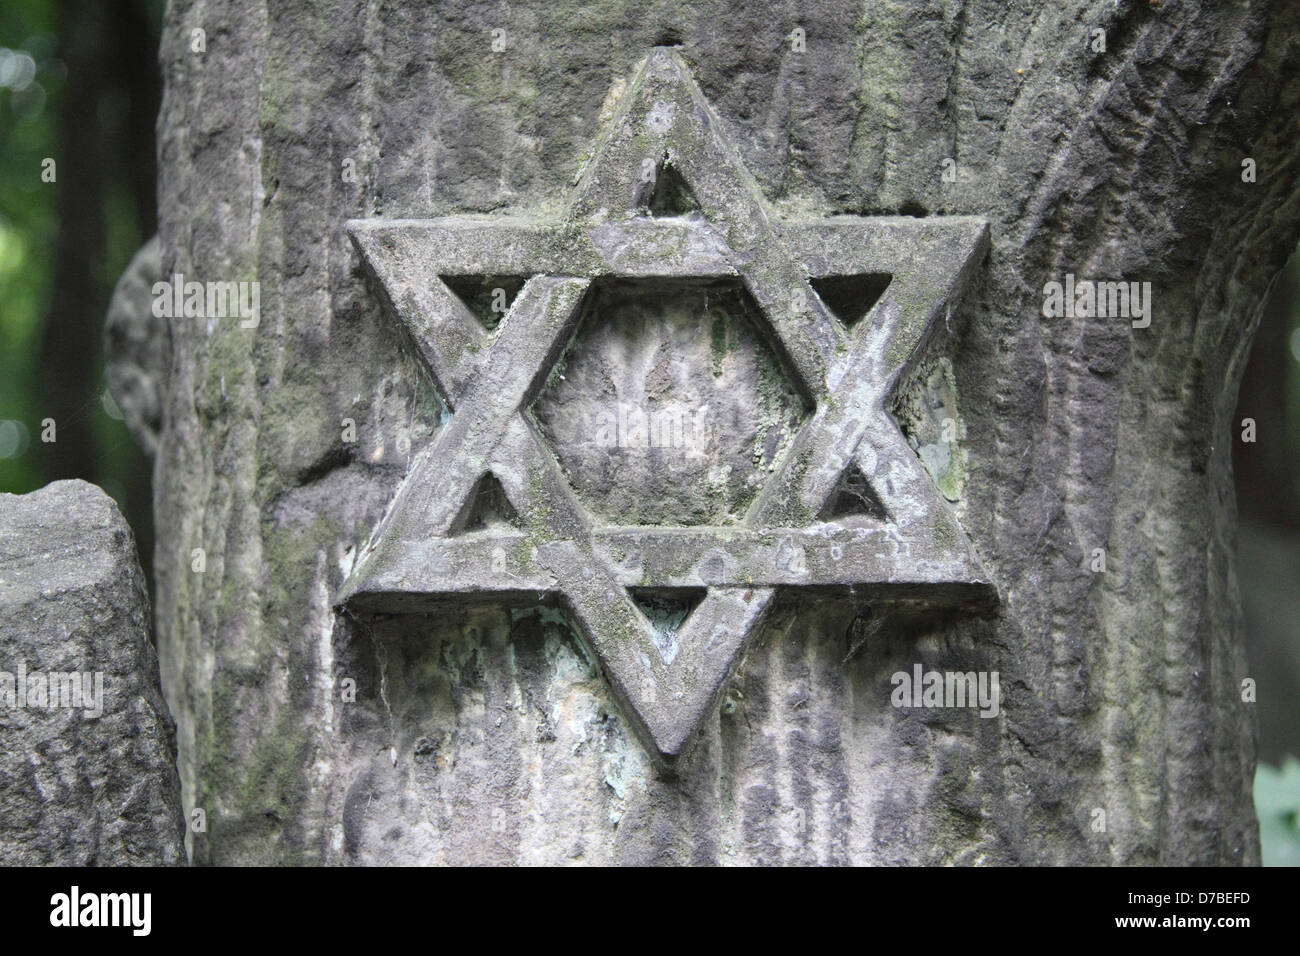 Magen David (Shield of David) symbolic sign on a tombstone at Jewish Cemetery in Warsaw, Poland Stock Photo